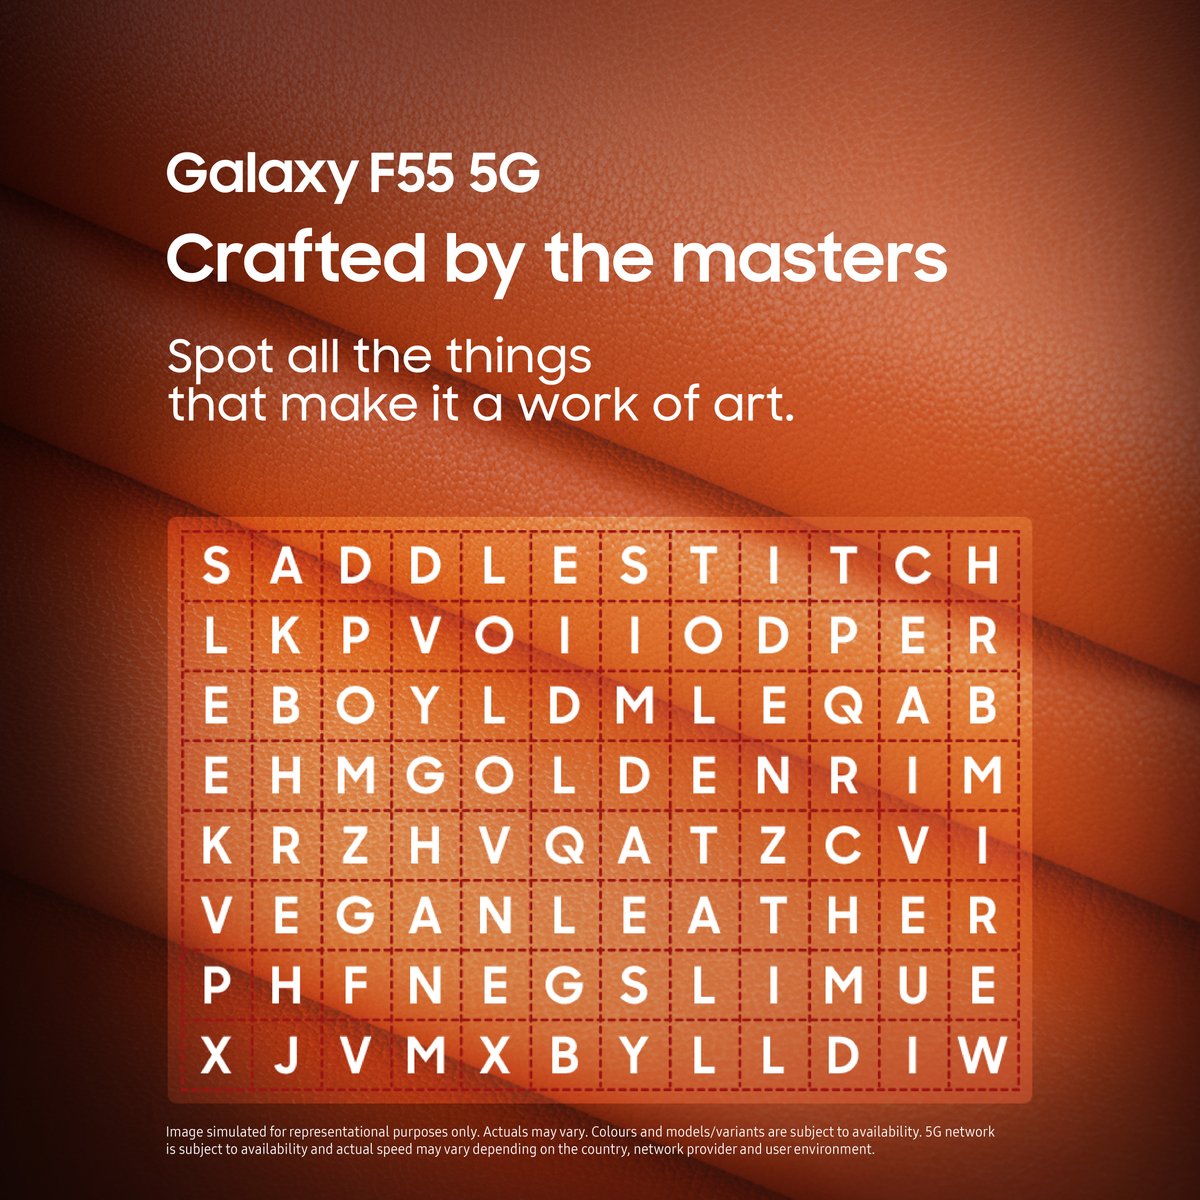 From the puzzle above, find out five reasons that entice every head to turn towards the all-new Galaxy F55 5G. List the features in the comments below and don’t forget to use the hashtags! Get notified: smsng.co/6050dkez8. #Samsung #CraftedByTheMasters #GalaxyF55 5G